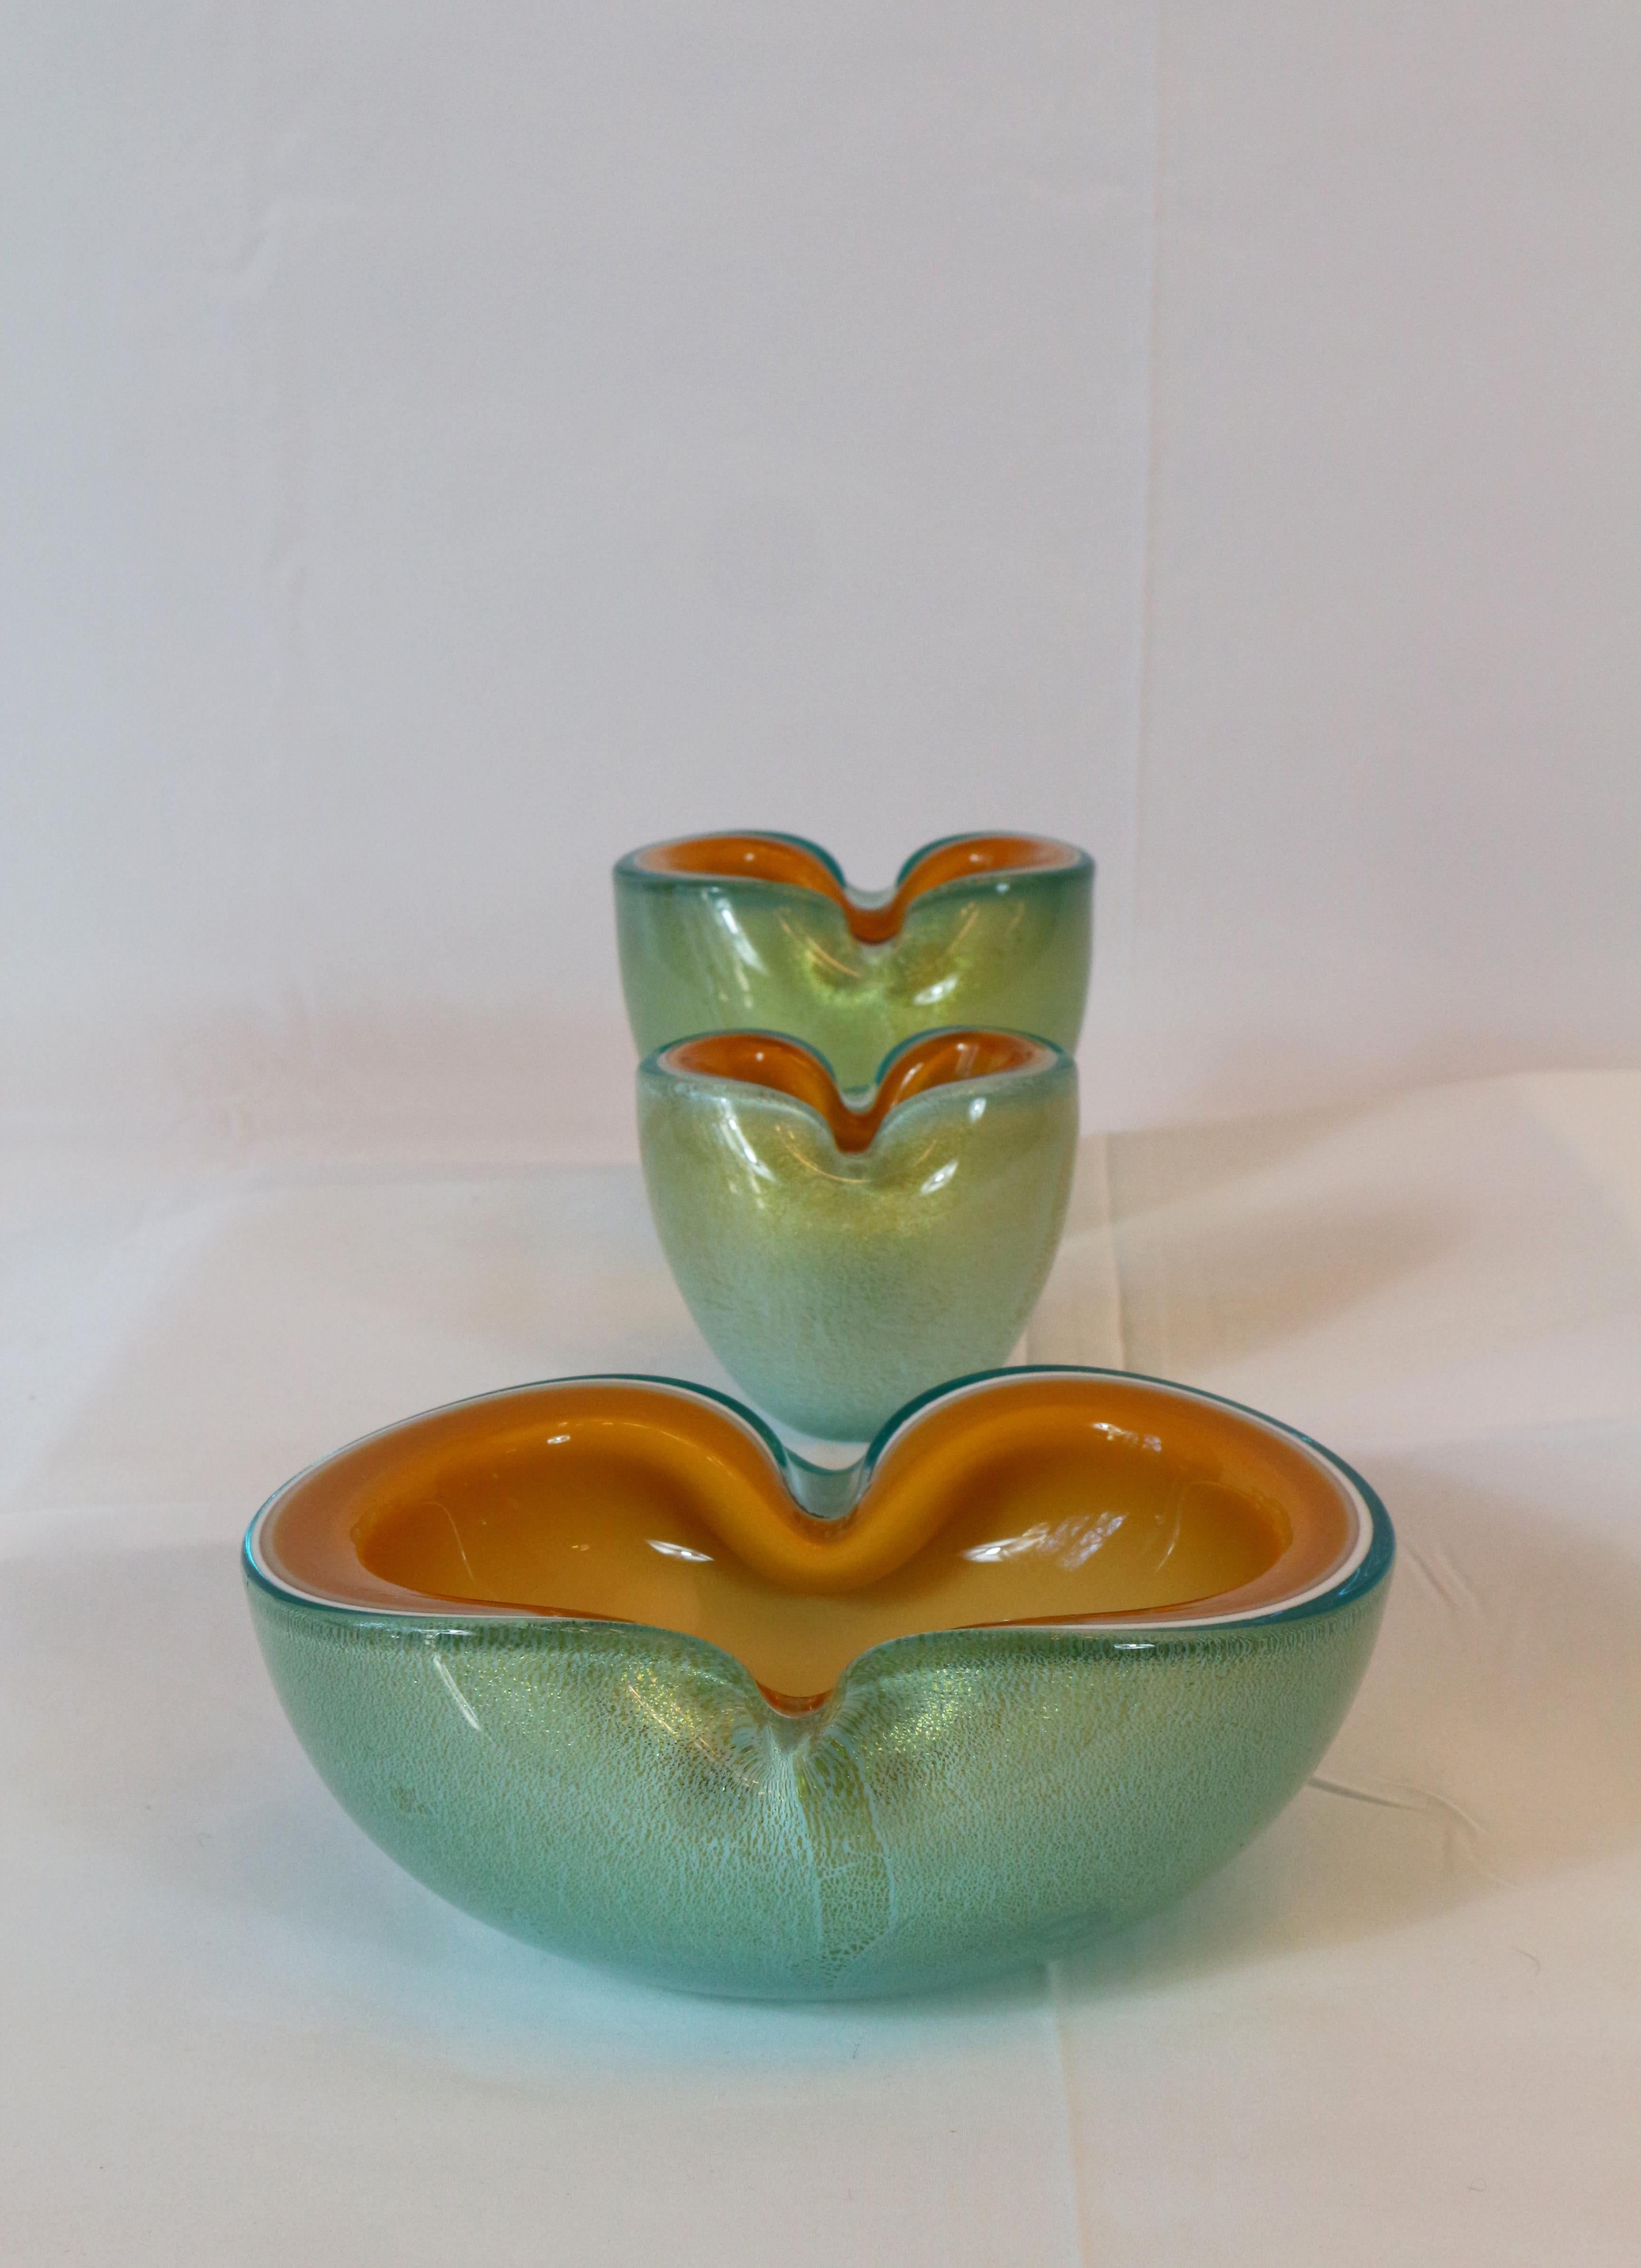 Wonderful three colors lightblue, mustard white and gold included in the glass .
